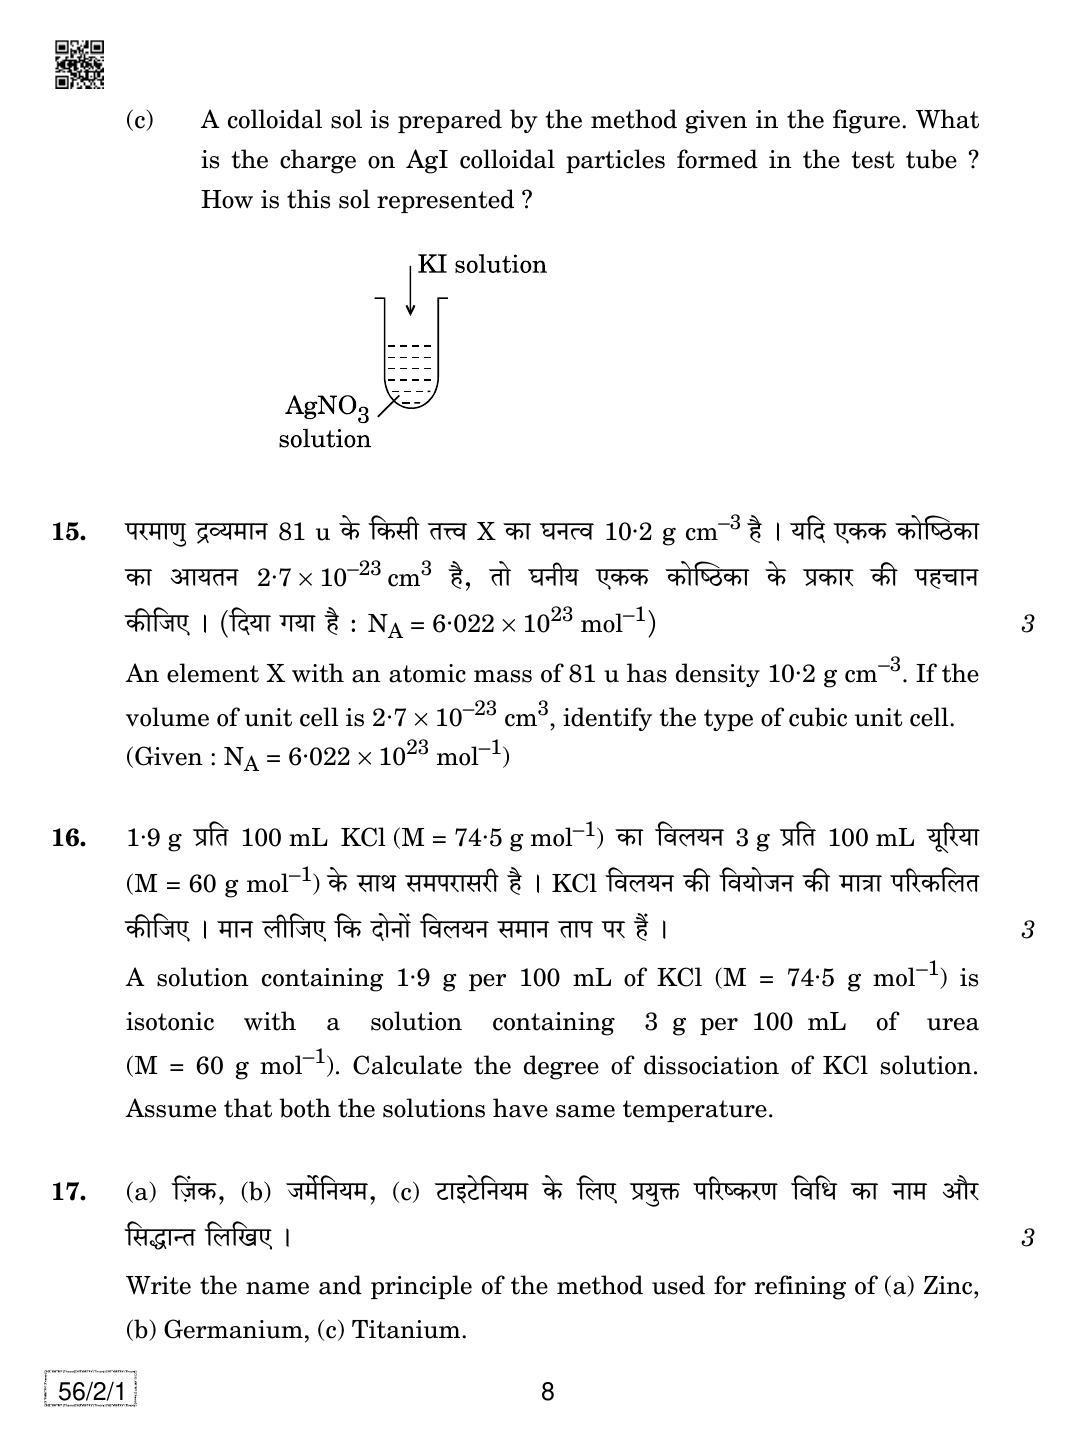 CBSE Class 12 56-2-1 Chemistry 2019 Question Paper - Page 8